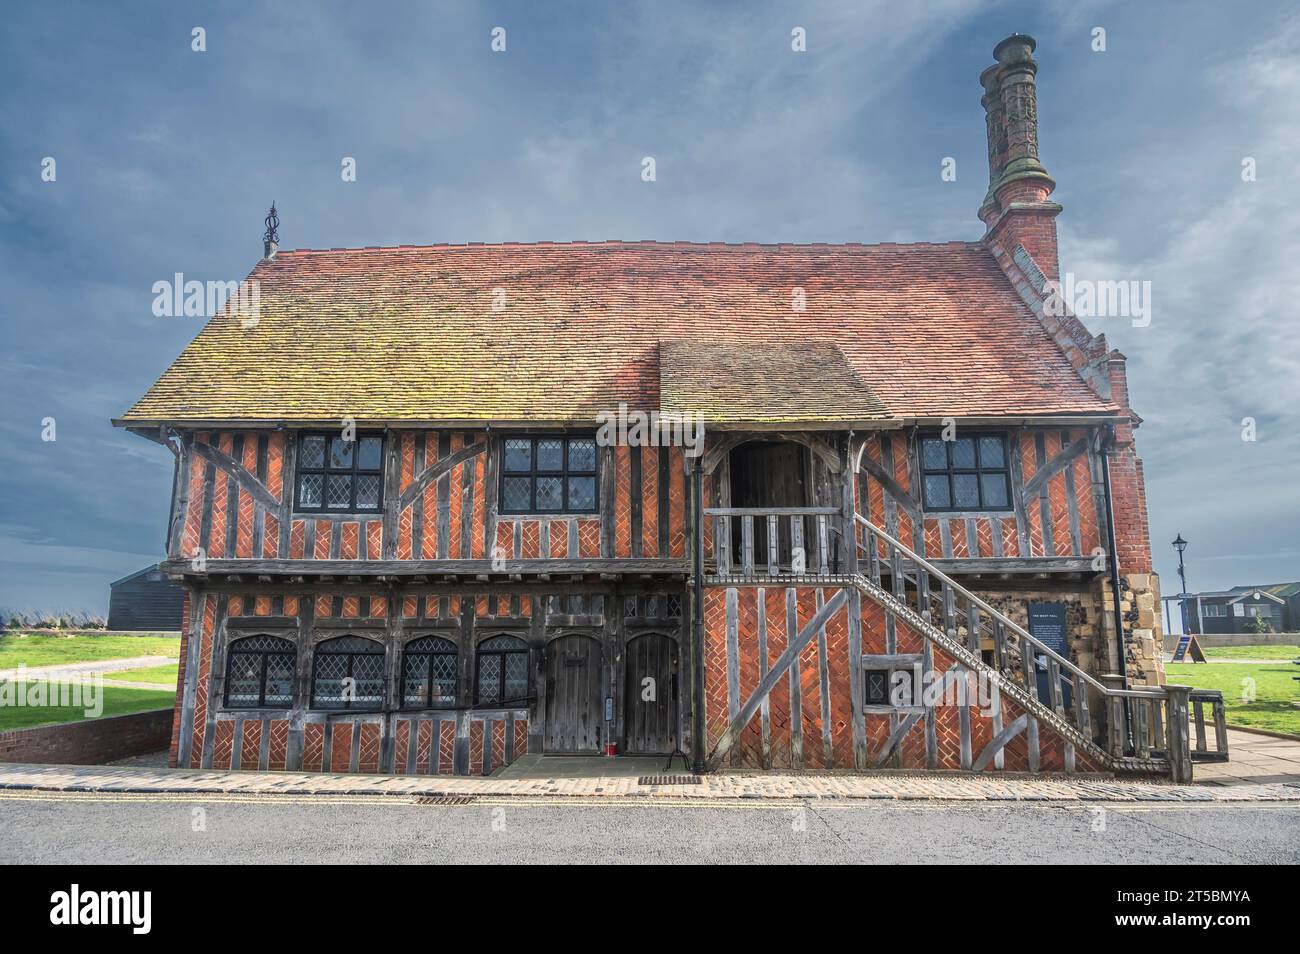 This medieval building is of Moot Hall located on the promenade of the Suffolk Heritage Coast and historical resort town of Aldeburgh, Stock Photo